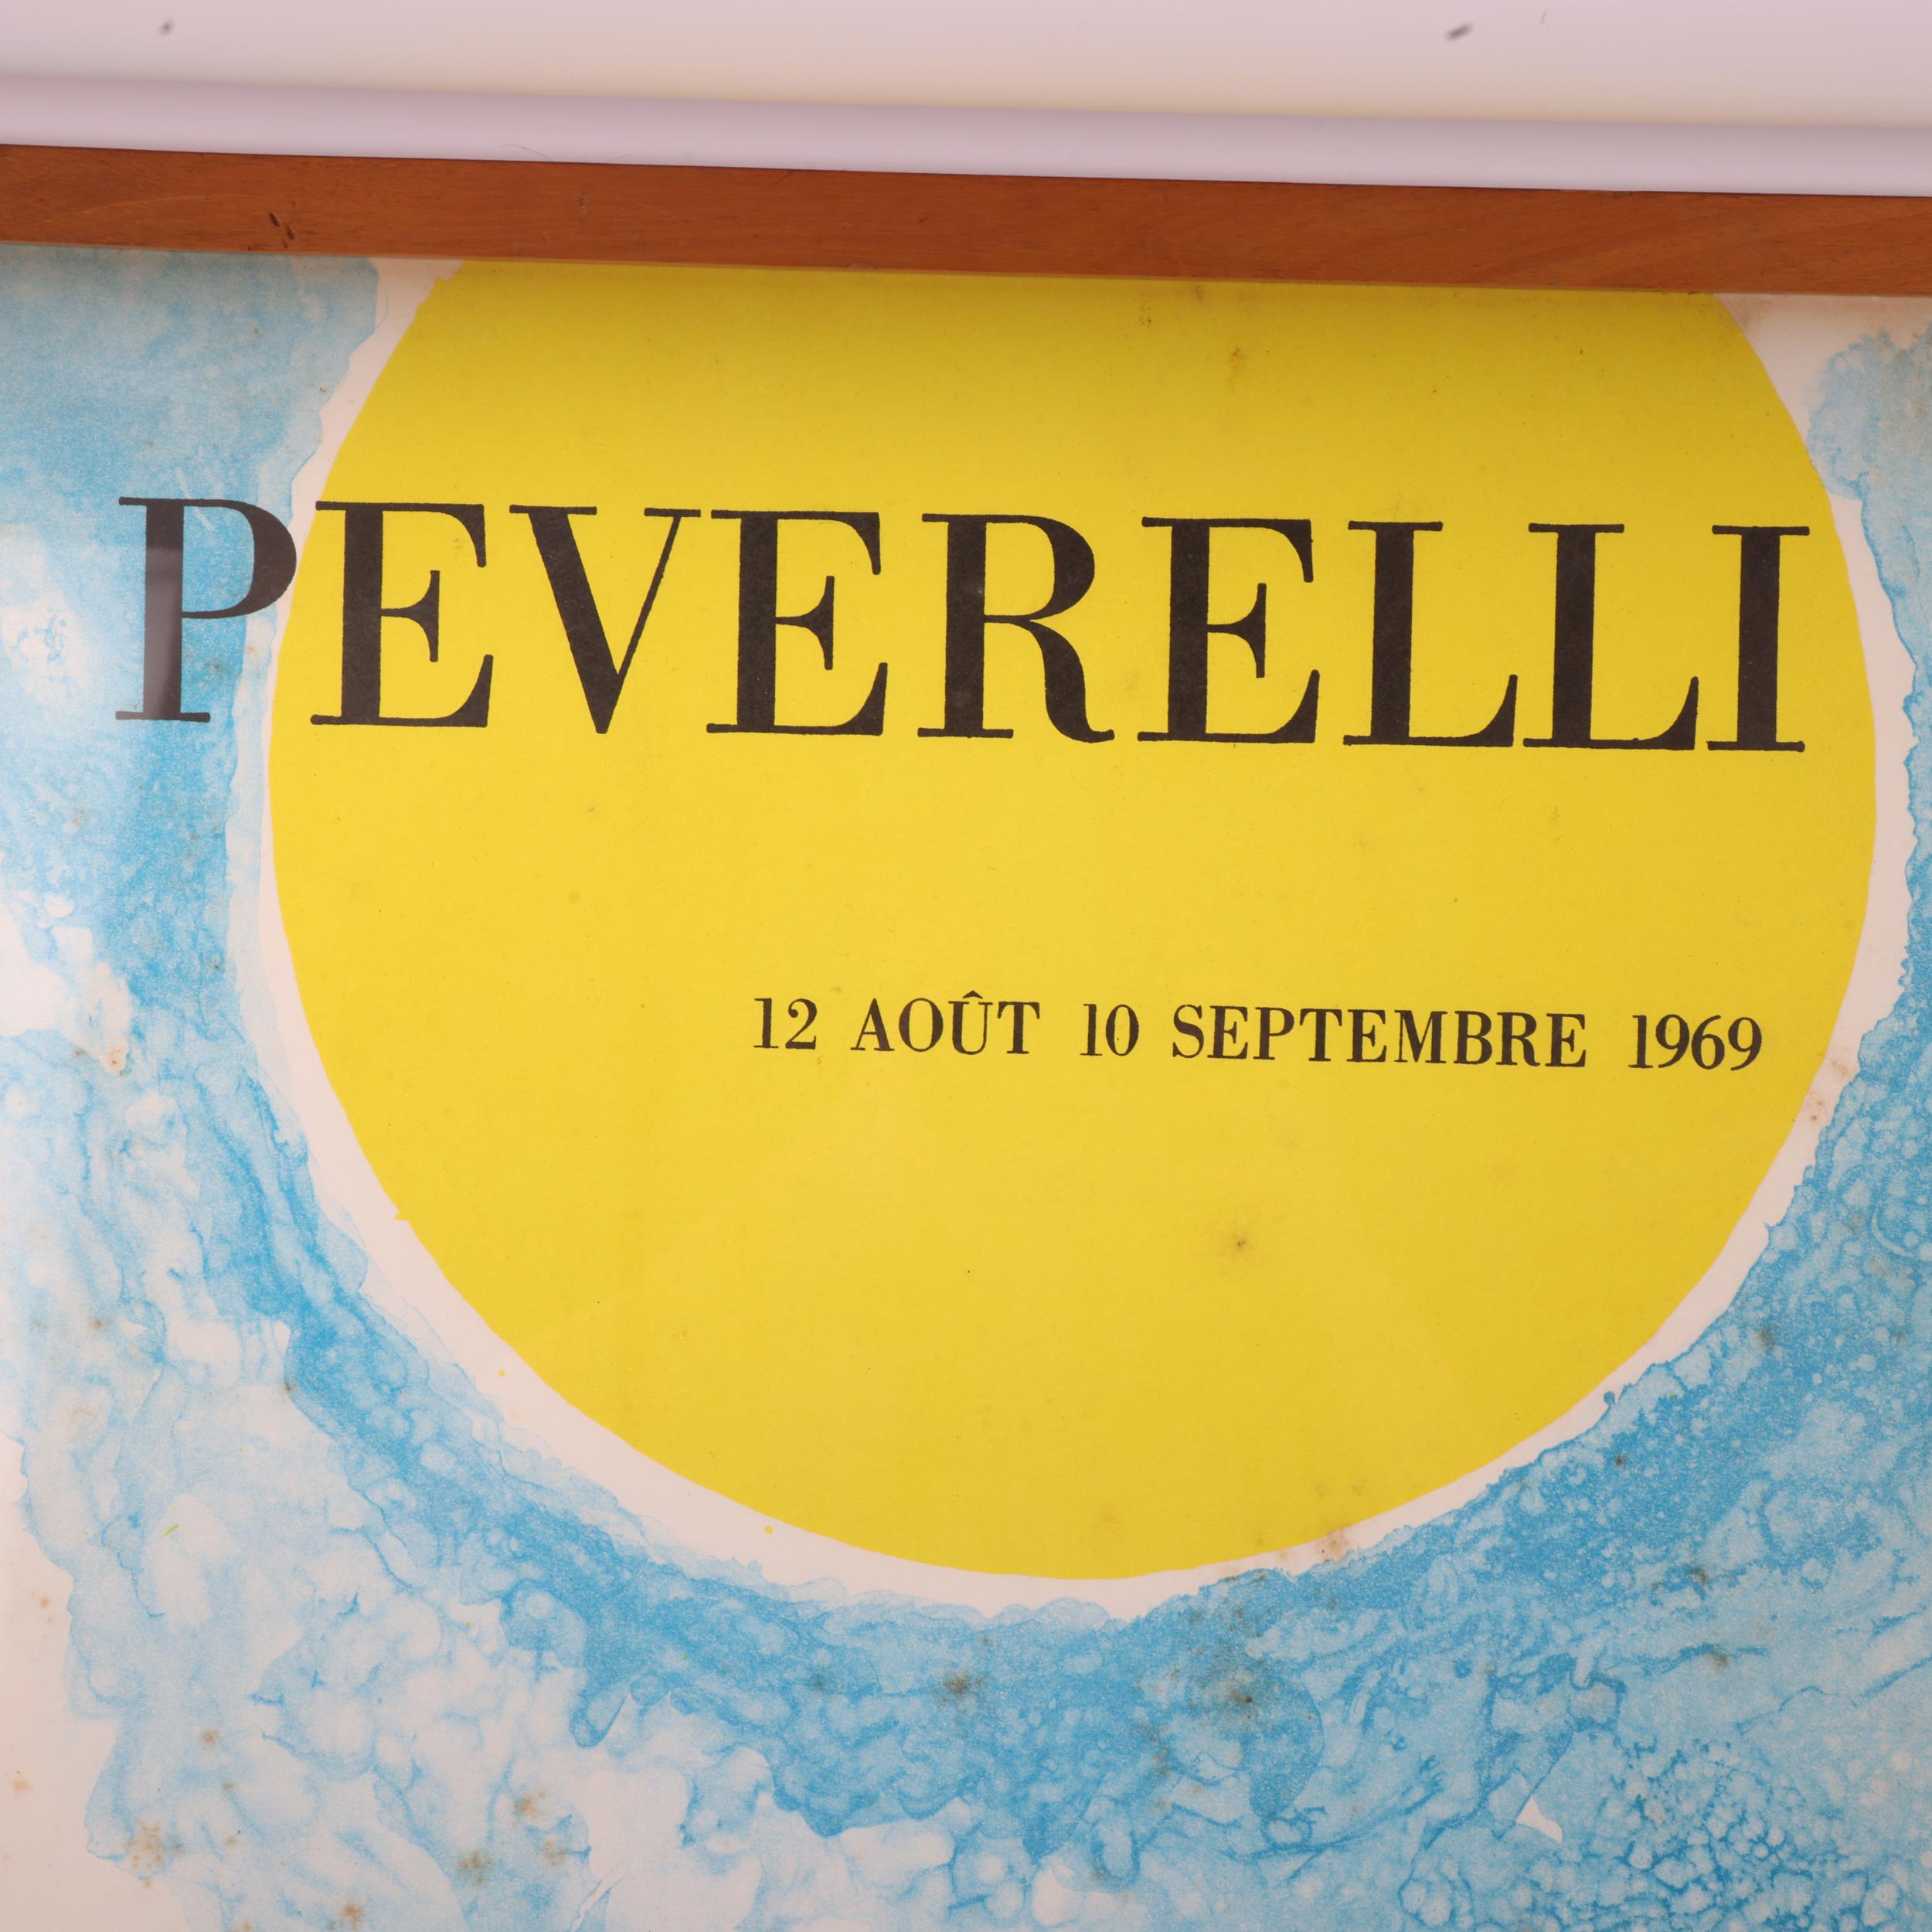 A 1969 French exhibition litho print poster for Peverelli, at Gallerie Renee Laporte, Antibes, - Image 3 of 3